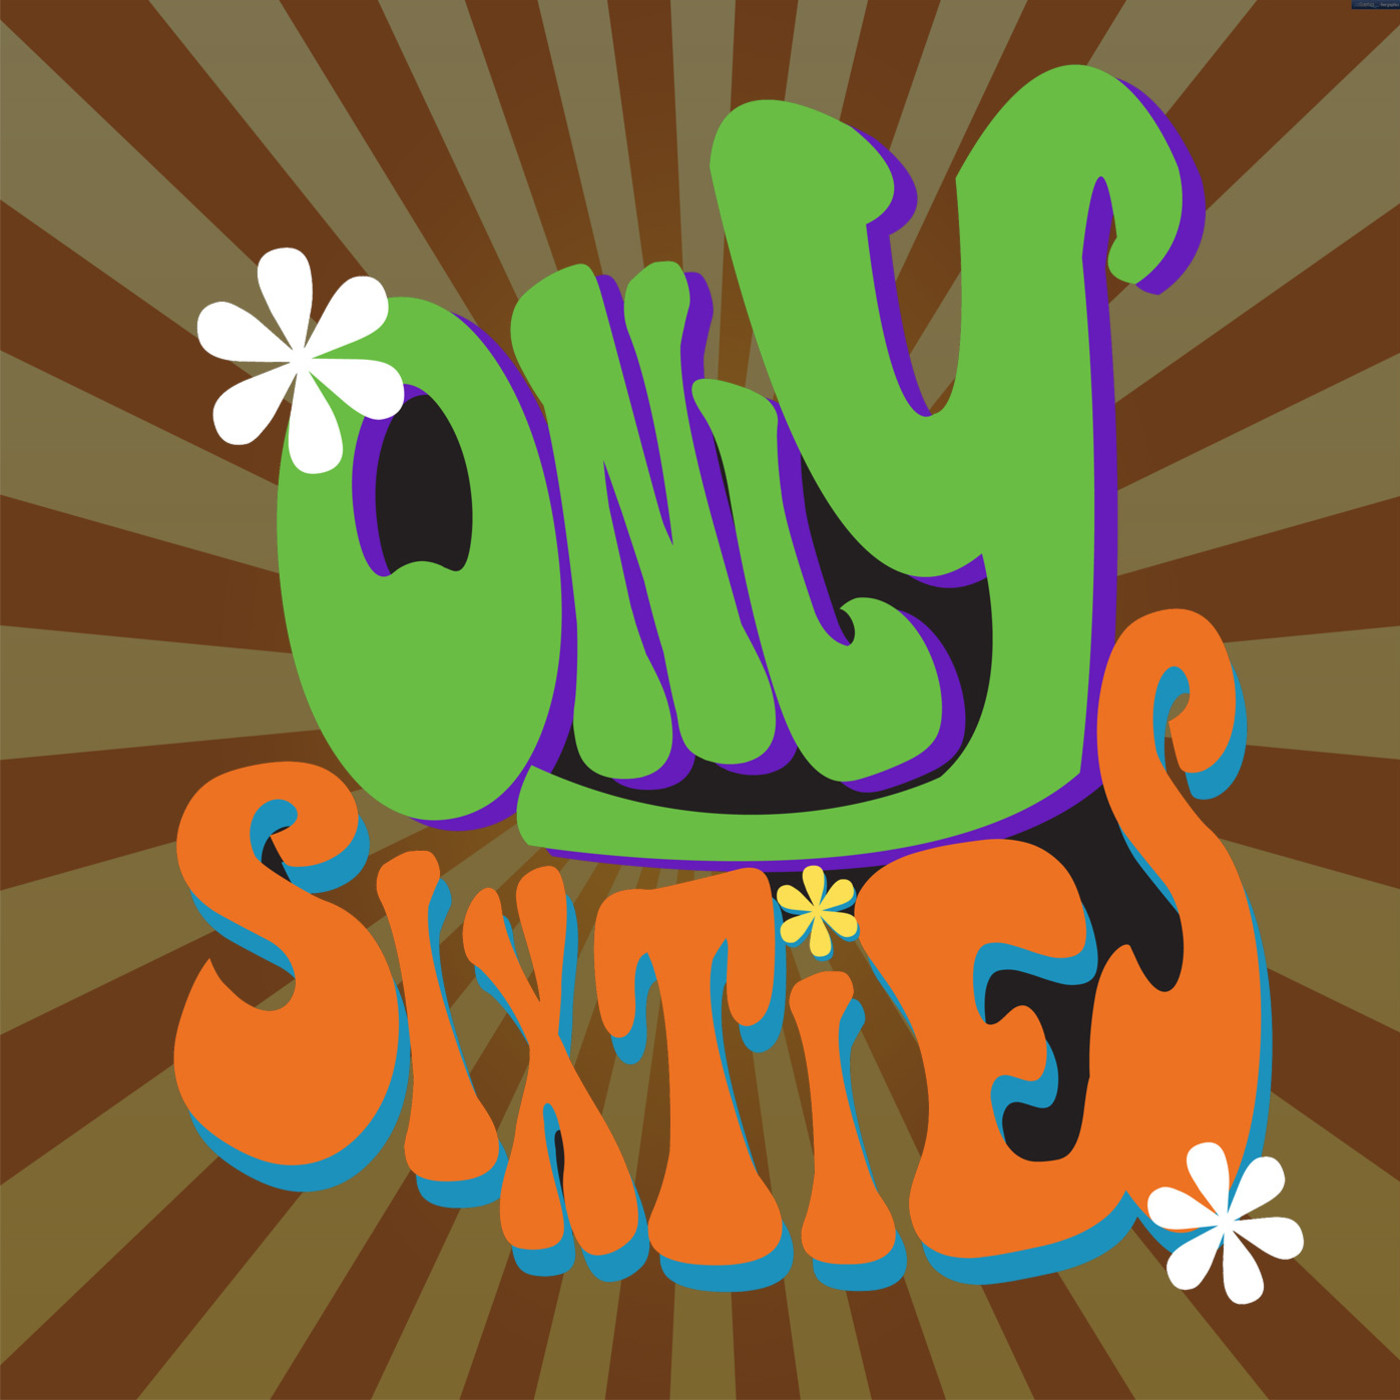 Only Sixties (Happy Destruction)